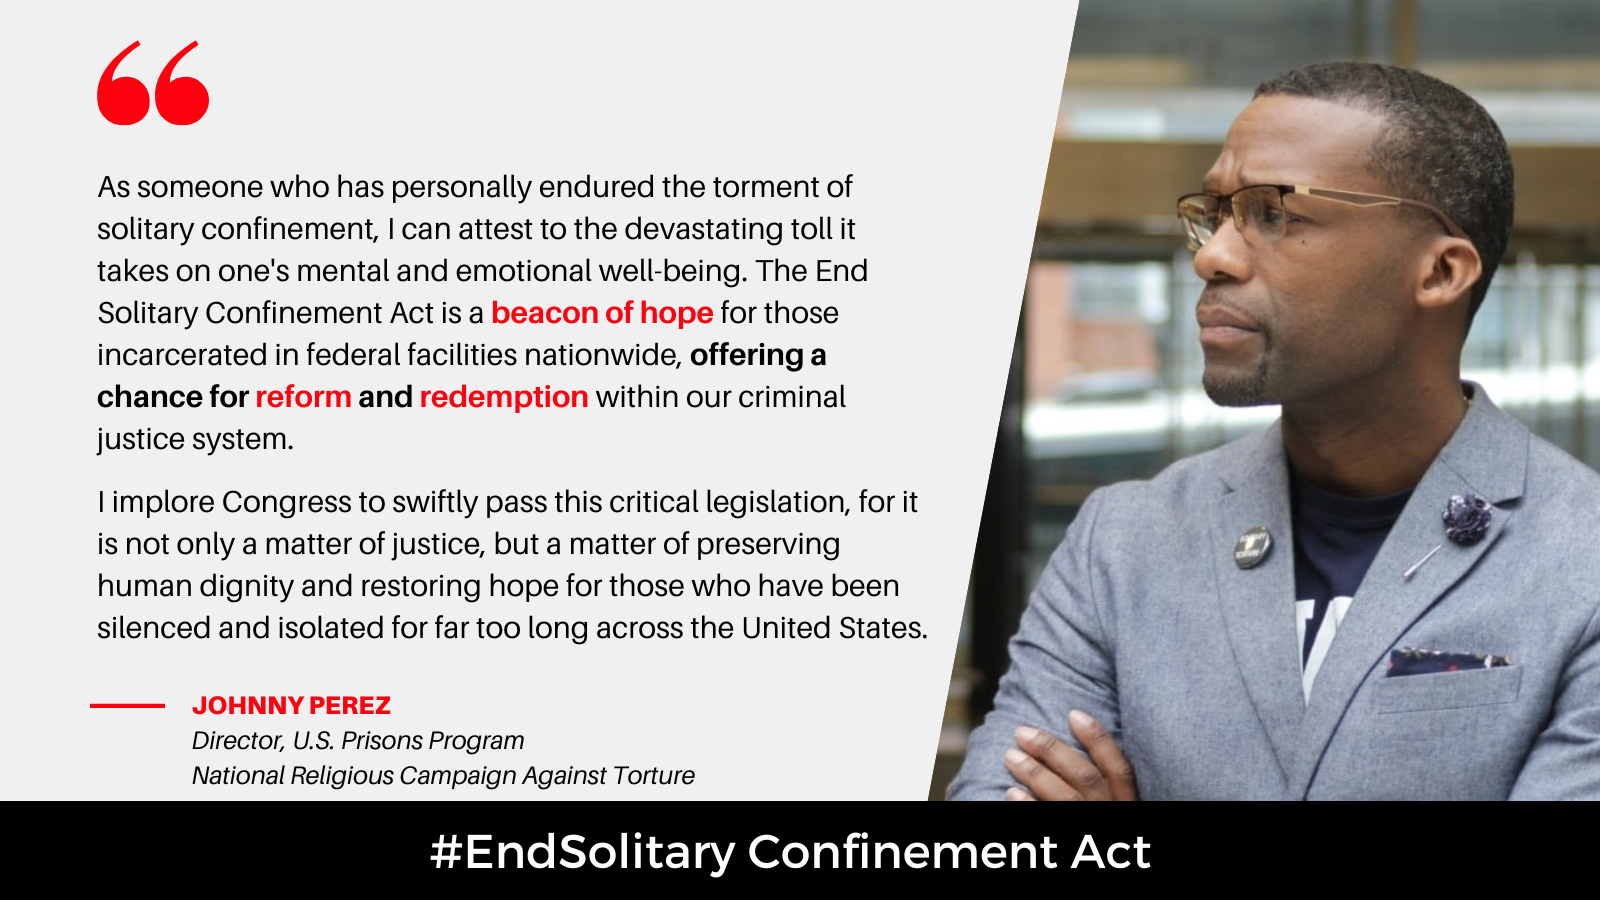 Johnny Perez in Support of the End Solitary Confinement Act